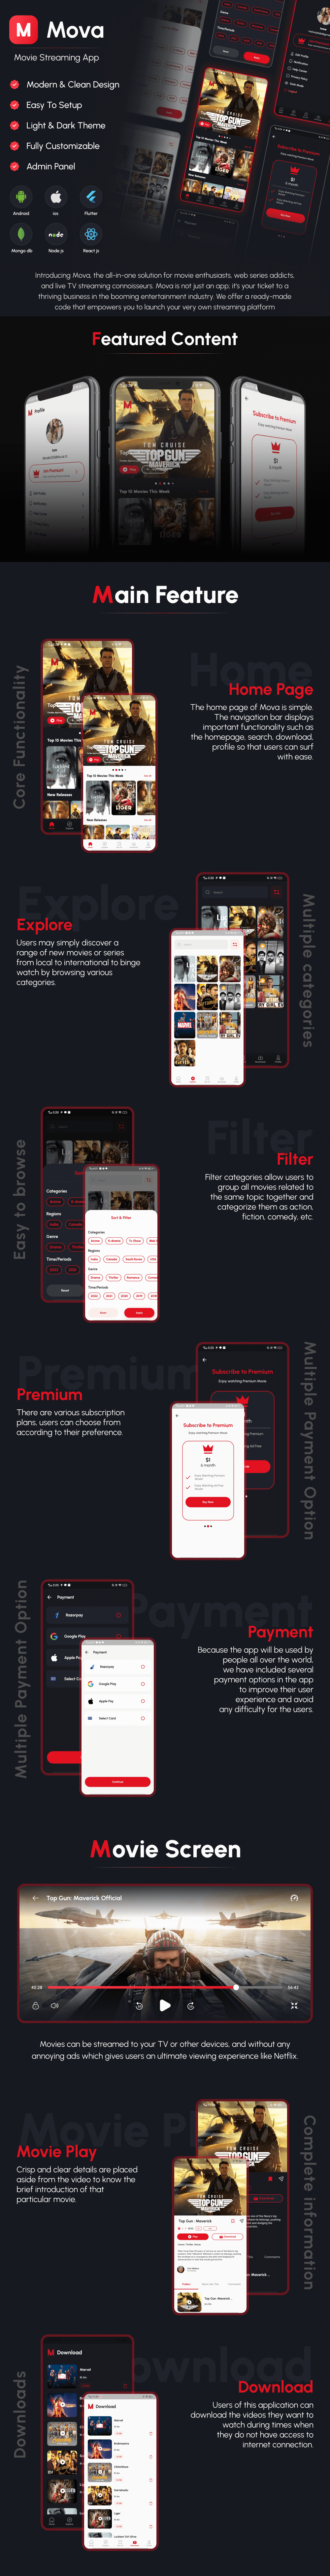 Mova - Movie, Web series, Live TV Streaming Flutter App script with Admin Panel - 1